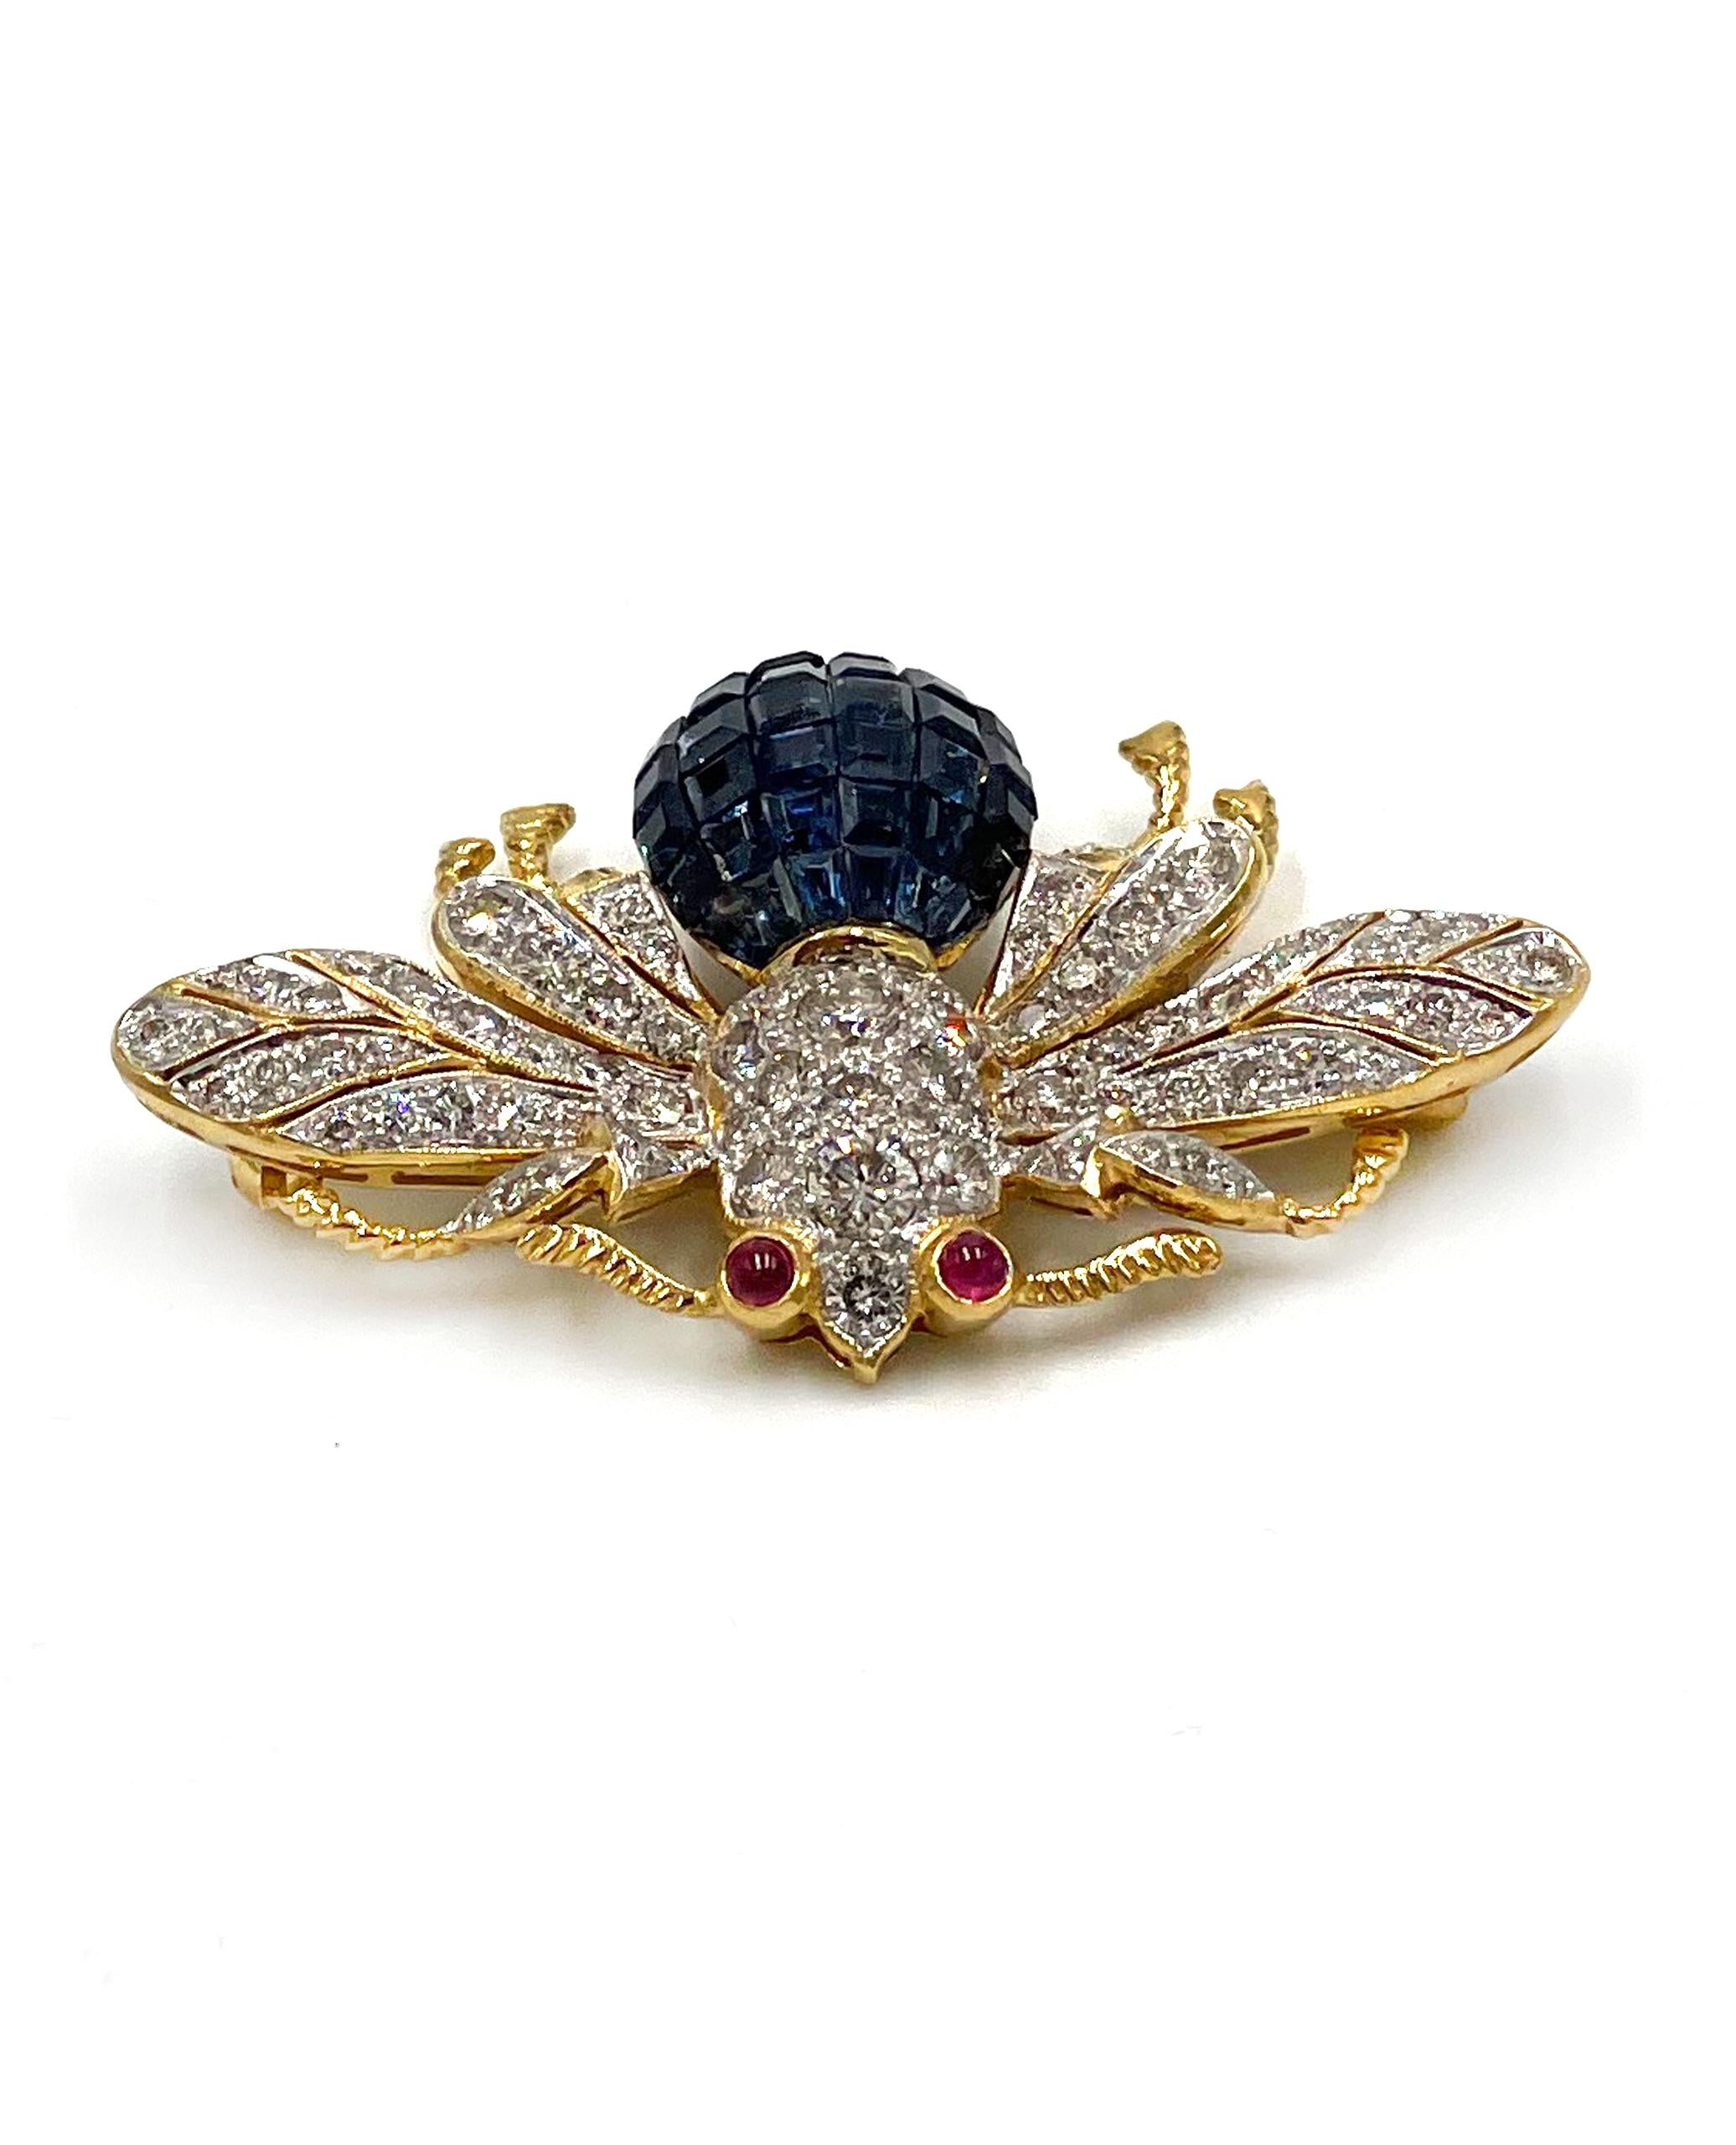 Pre owned vintage estate 18K yellow gold deep intense blue sapphire bee pin.  The body of the bee has 39 invisibly set square cut blue sapphires with an approximate total weight of 4.50 carats.  Set on both wings and body are a total of 92 round